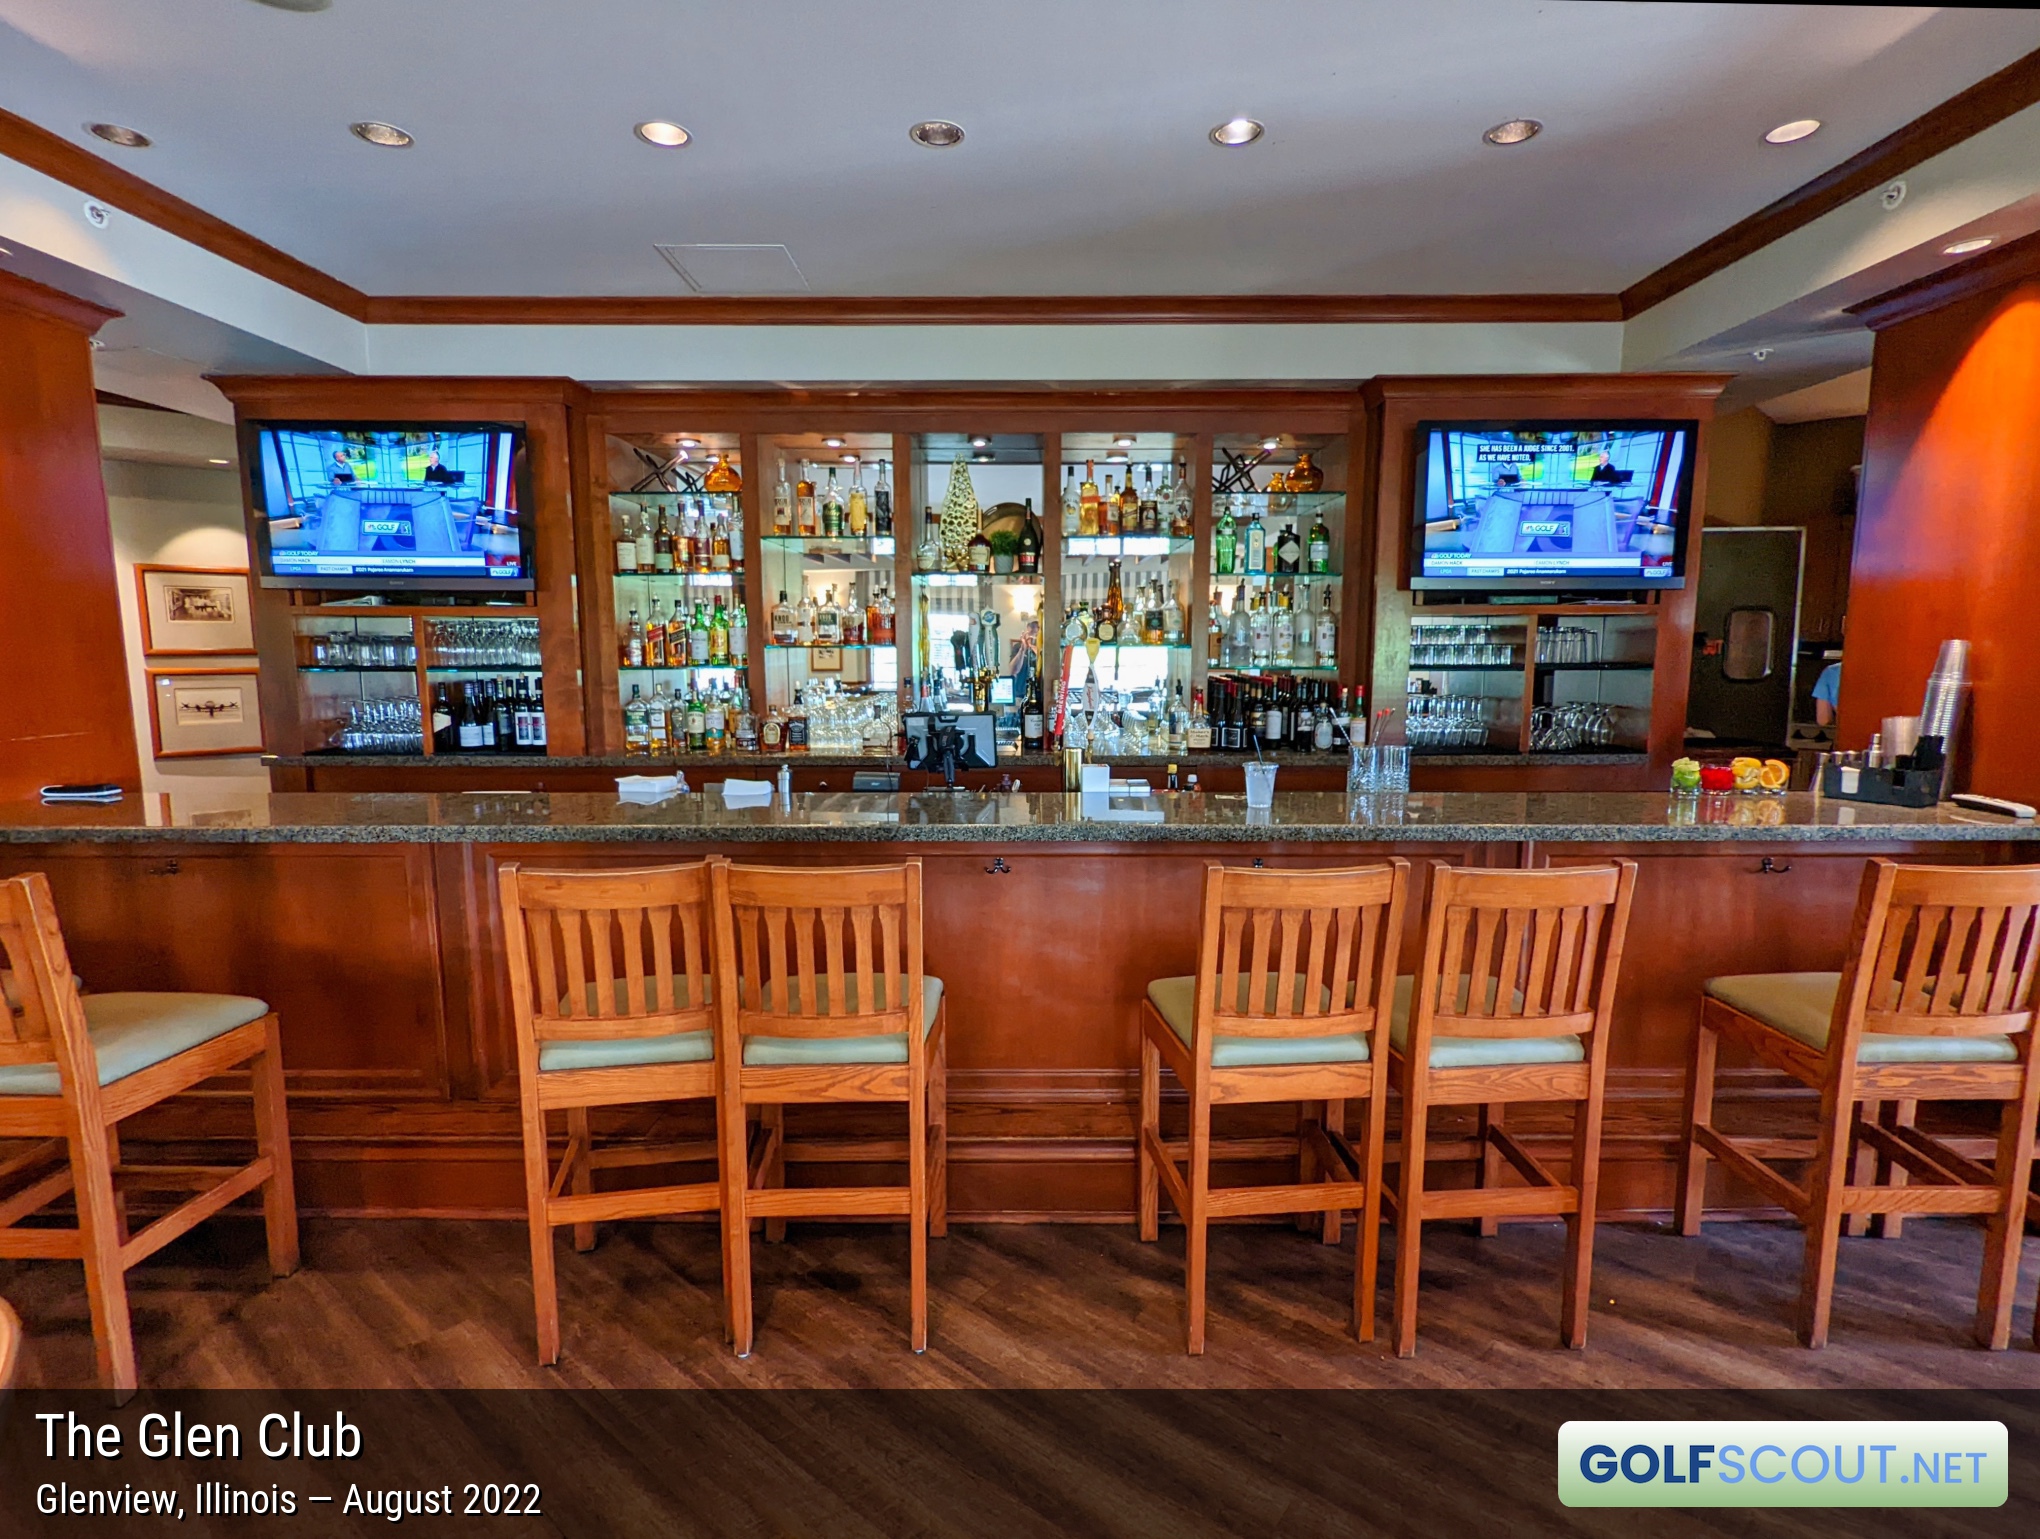 Photo of the restaurant at The Glen Club in Glenview, Illinois. 